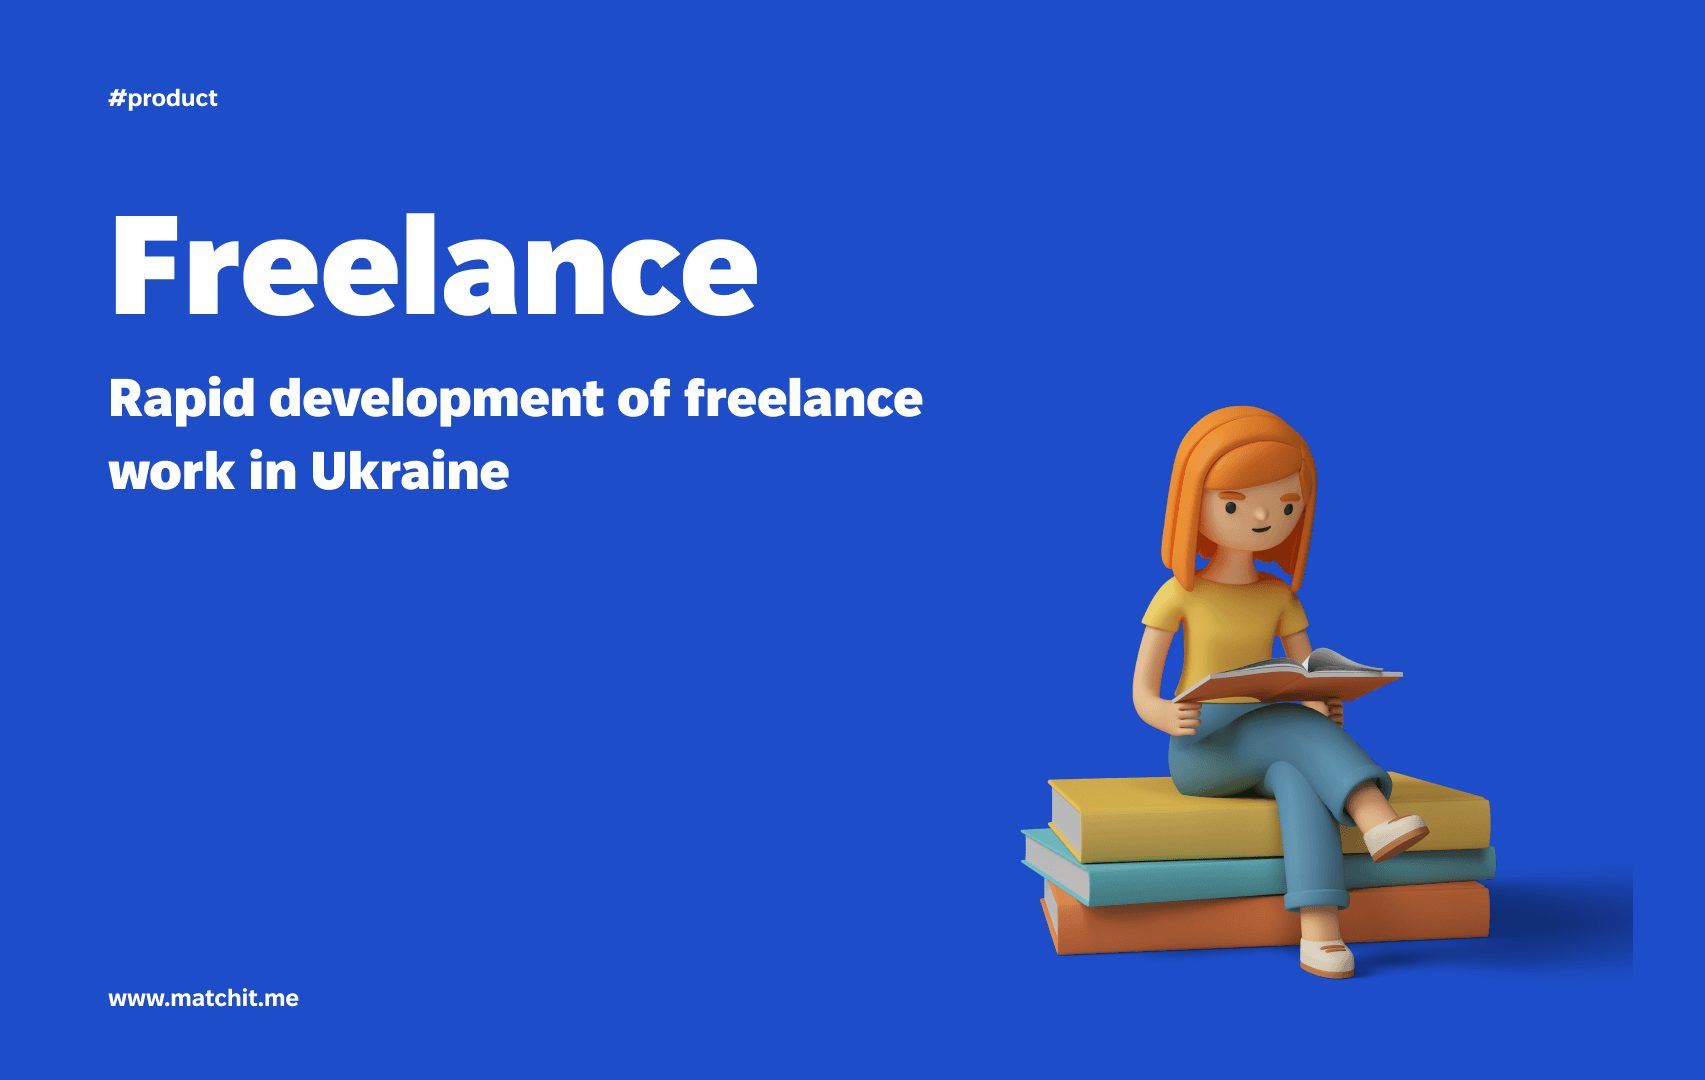 ukrainian-freelancers-are-developing-quickly